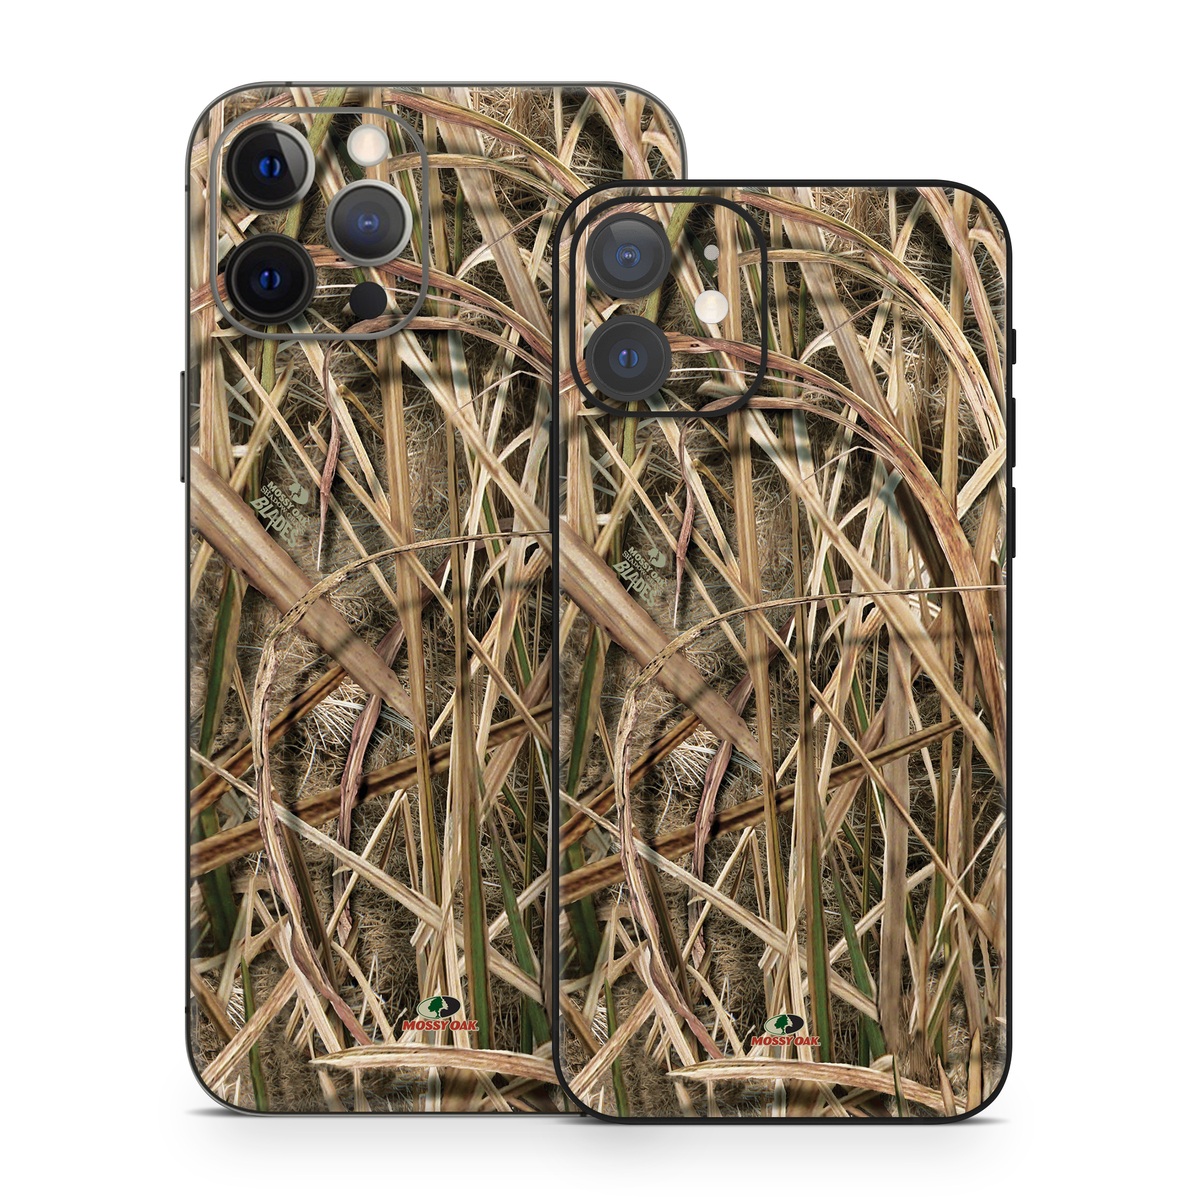 iPhone 12 Skin design of Grass, Straw, Plant, Grass family, Twig, Adaptation, Agriculture, with black, green, gray, red colors